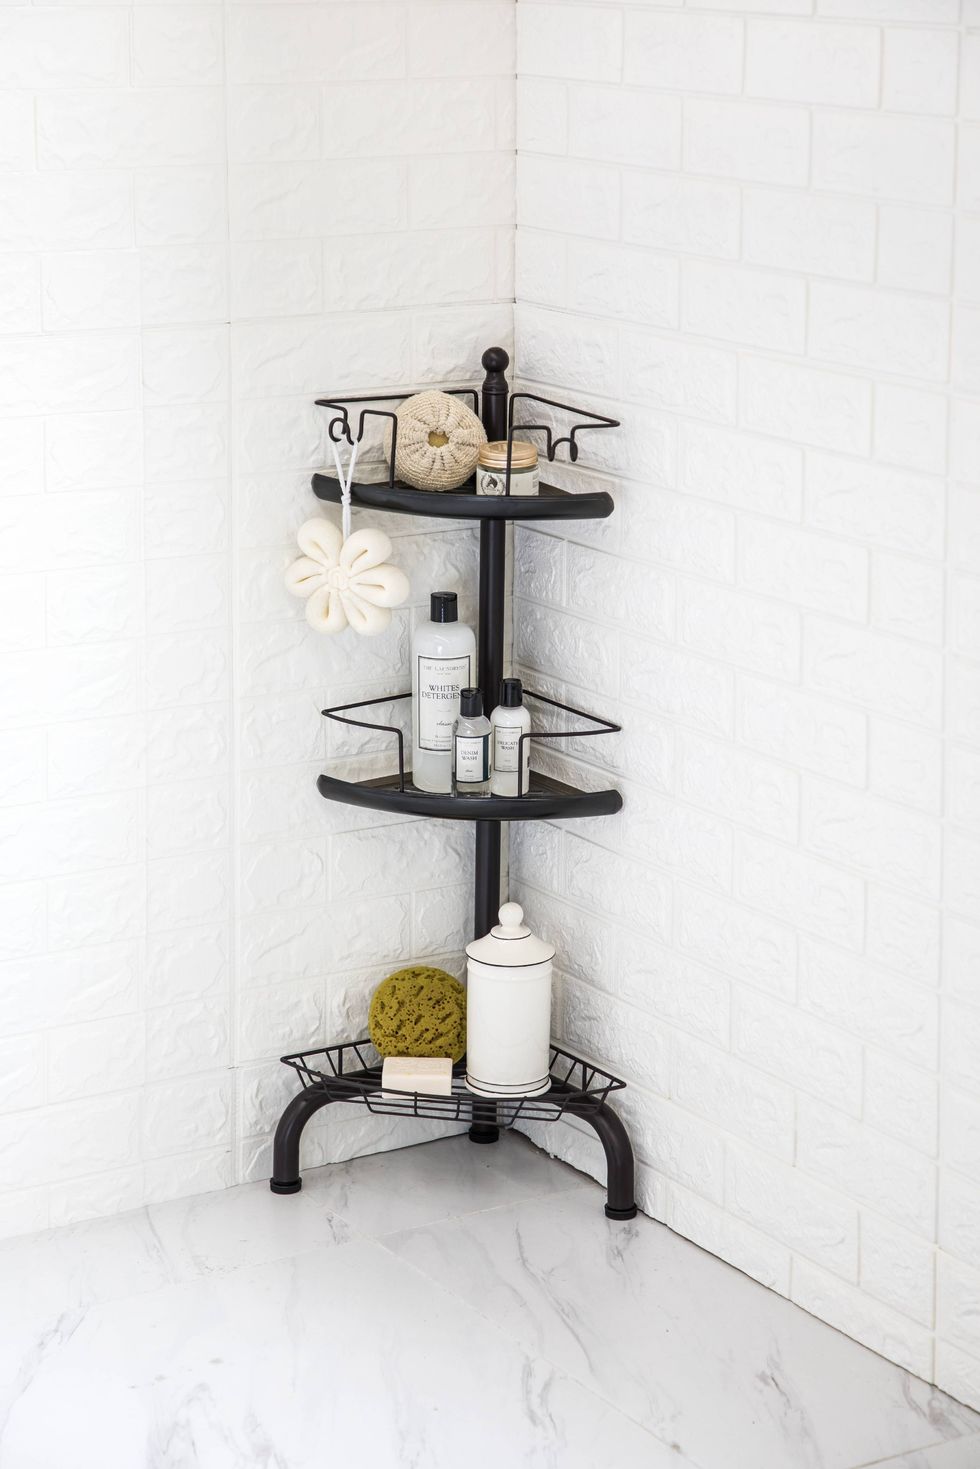  ADOVEL Shower Caddy Hanging, 2 in 1 Shower Caddy Over